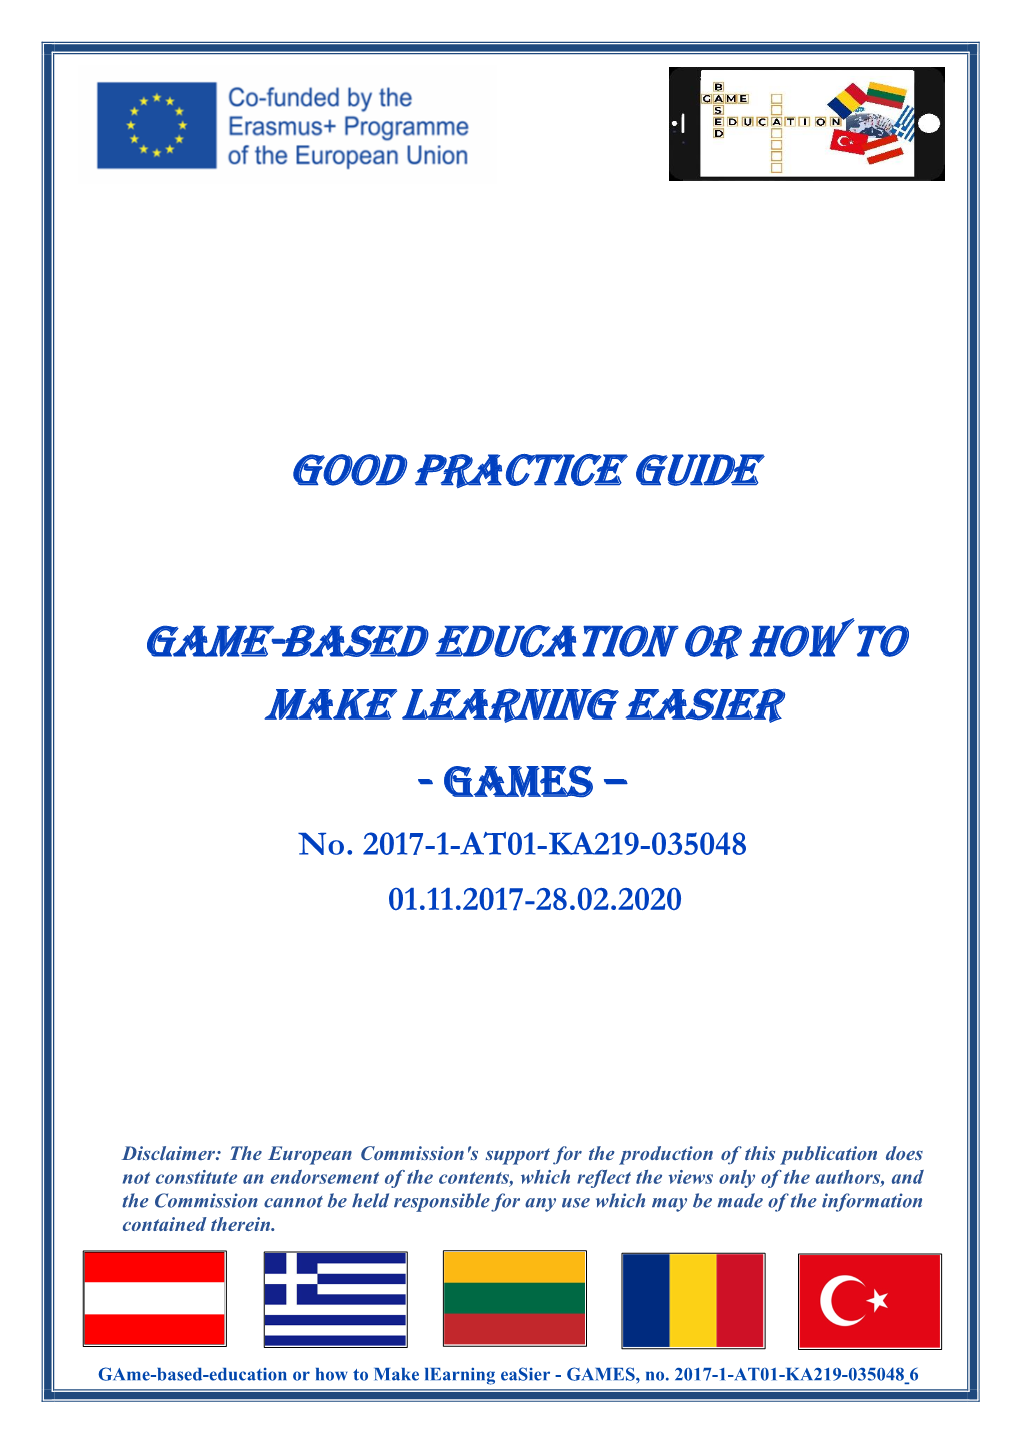 GOOD PRACTICE GUIDE Game-Based Education Or